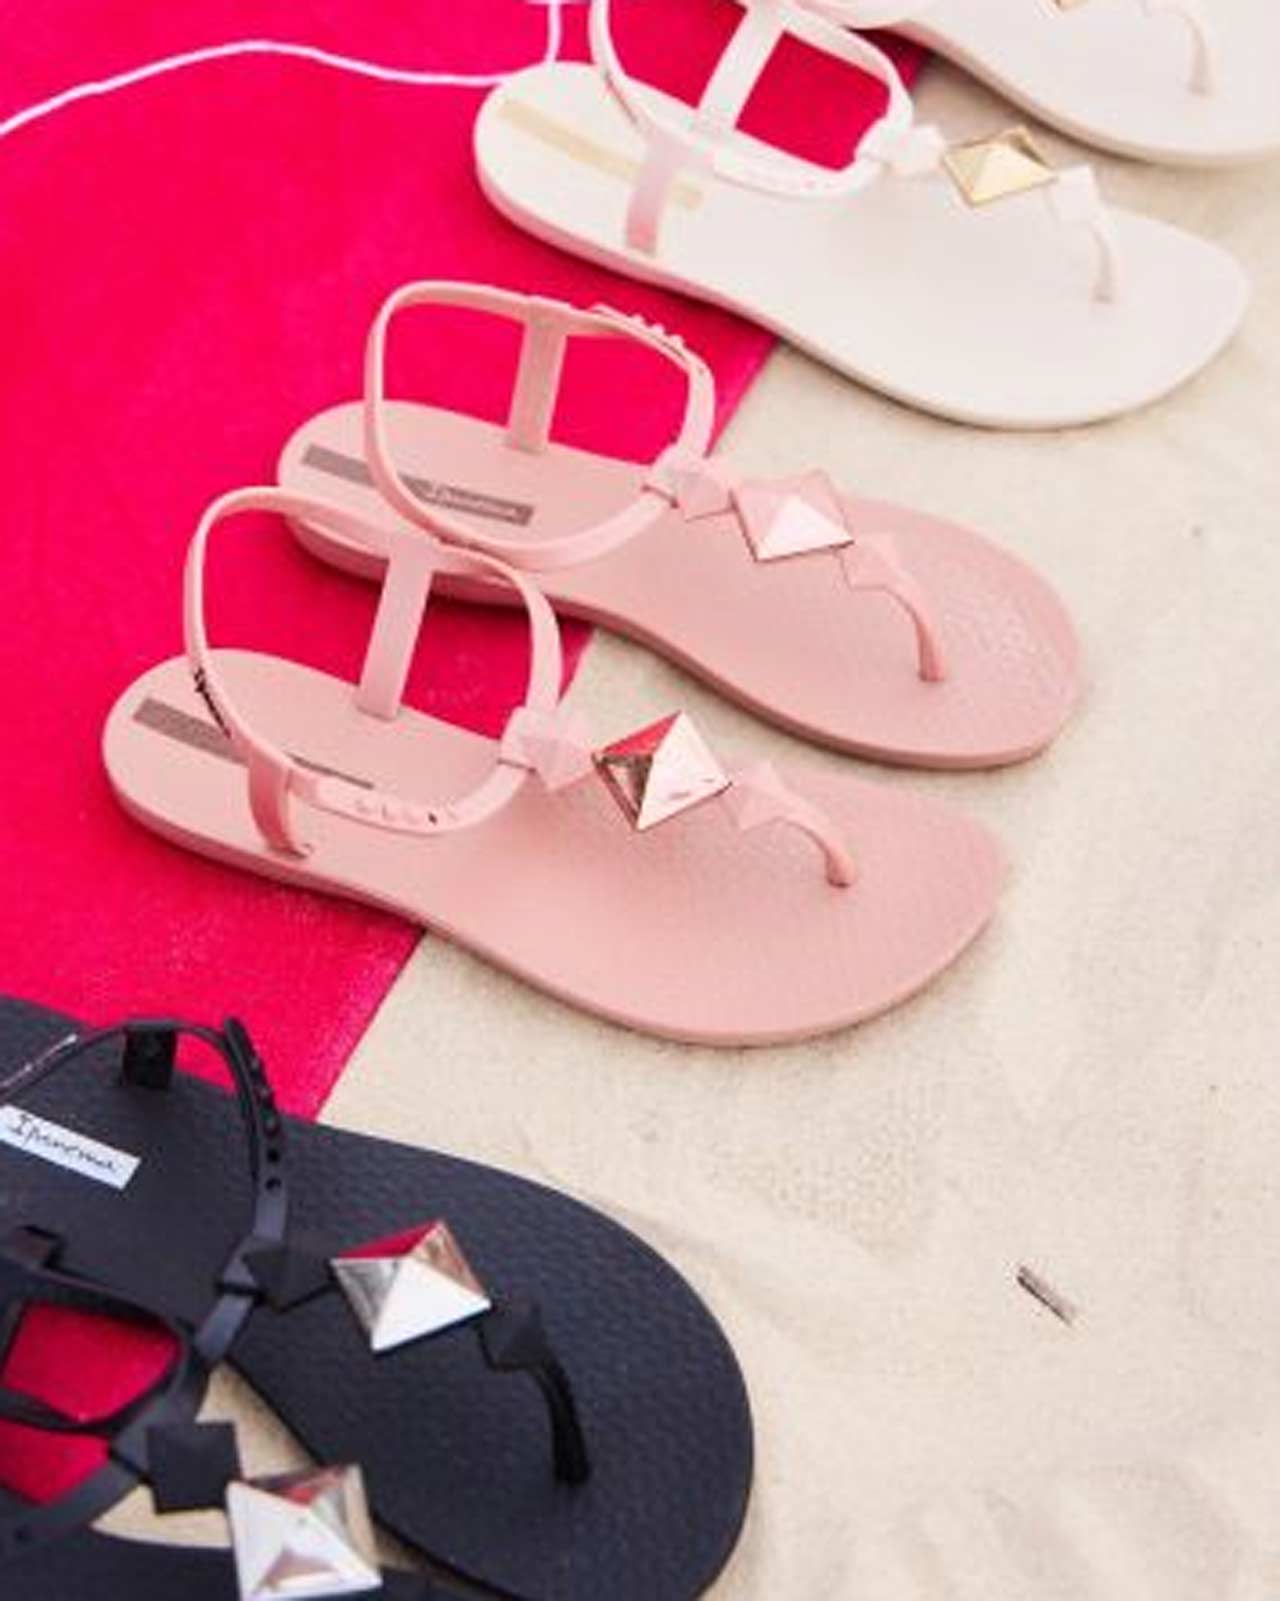 Stepping Into Summer: Colourful Sandal Styles To Enjoy The Australian Sun